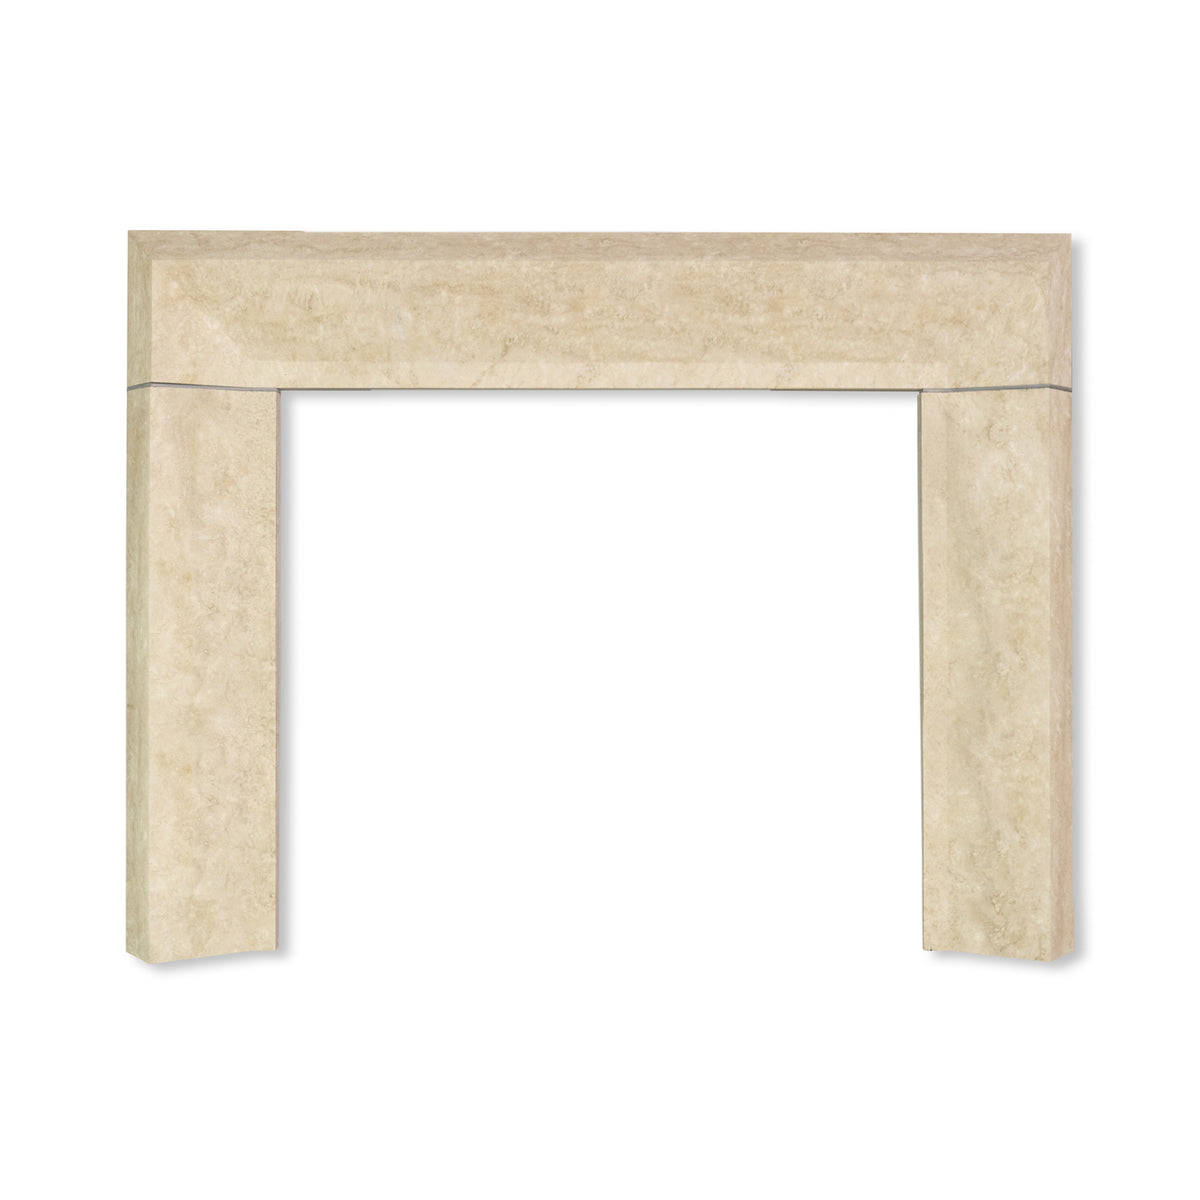 Meridian Fireplace in Latte Travertine with Honed Finish (Extended Range) Main Product Slider View